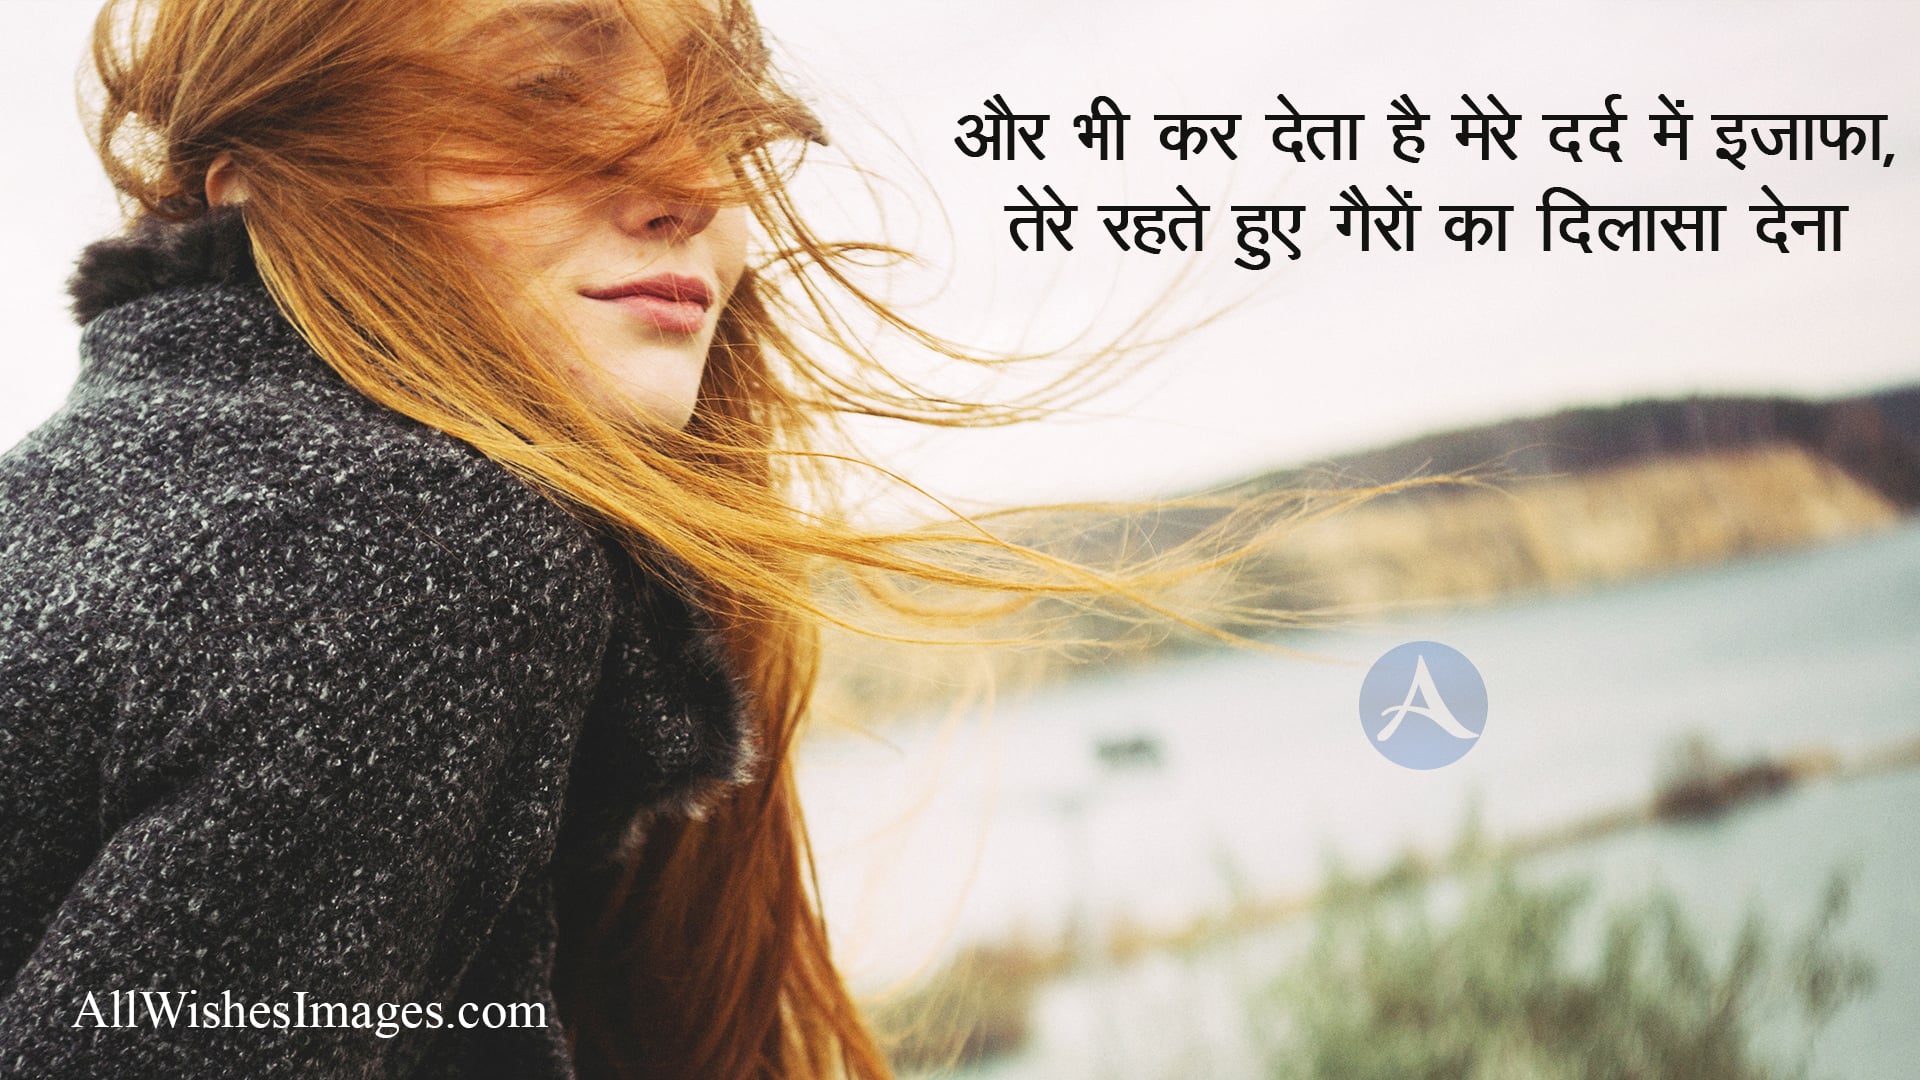 Dard Bhari Download - All Wishes Images - Images for WhatsApp